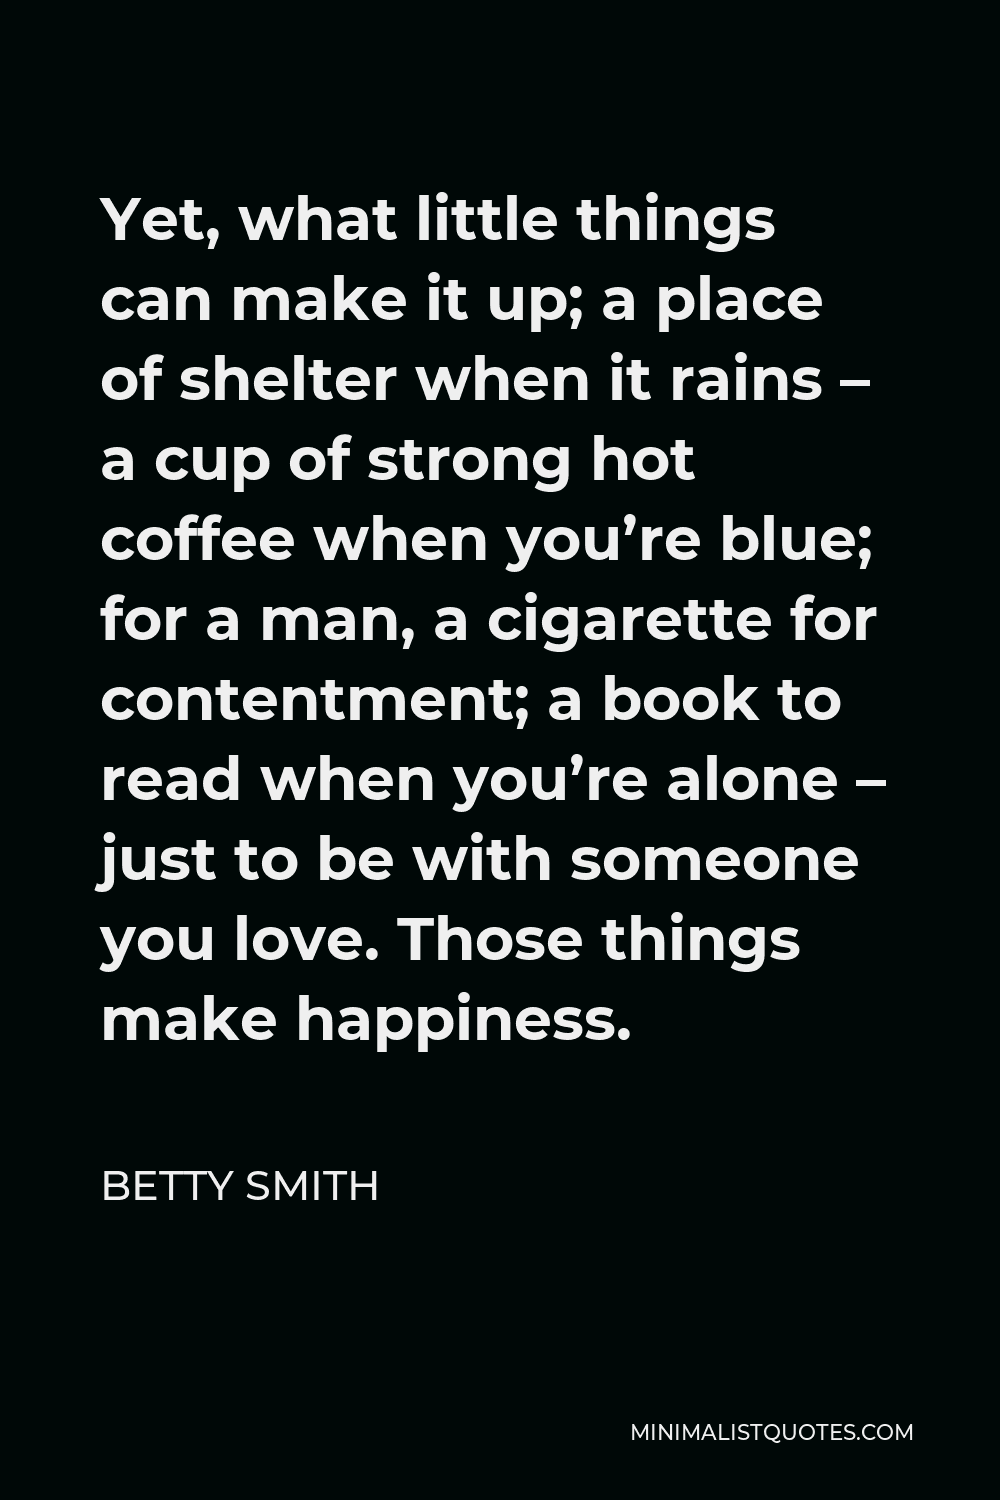 Betty Smith Quote - Yet, what little things can make it up; a place of shelter when it rains – a cup of strong hot coffee when you’re blue; for a man, a cigarette for contentment; a book to read when you’re alone – just to be with someone you love. Those things make happiness.